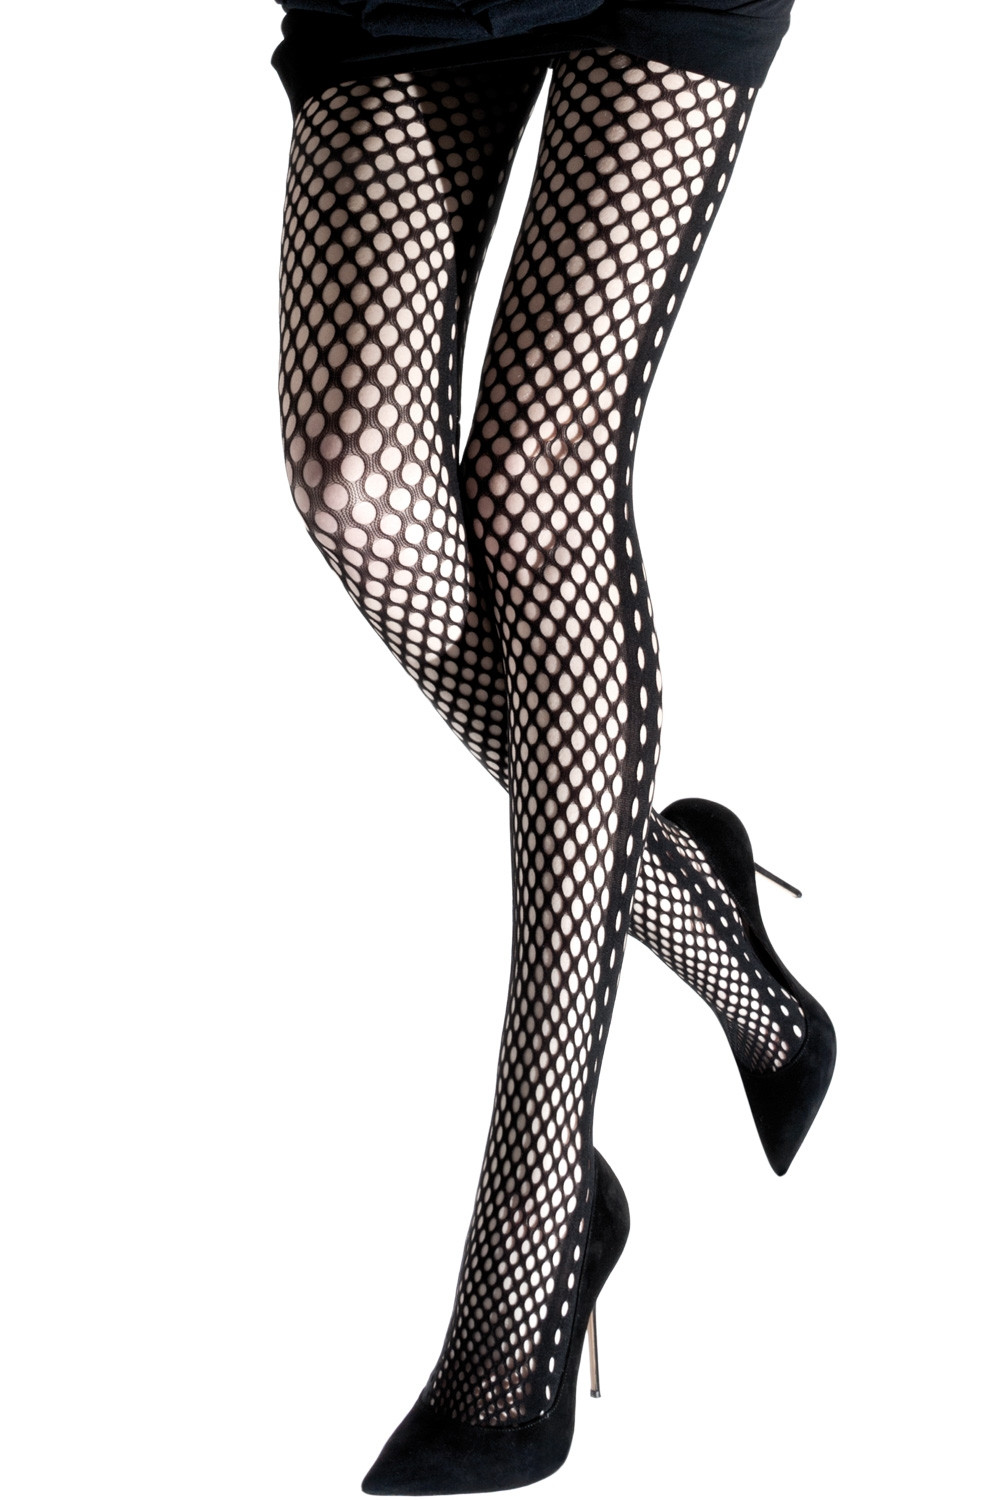 Gothic Lace Tights, Timeless Styles, Women